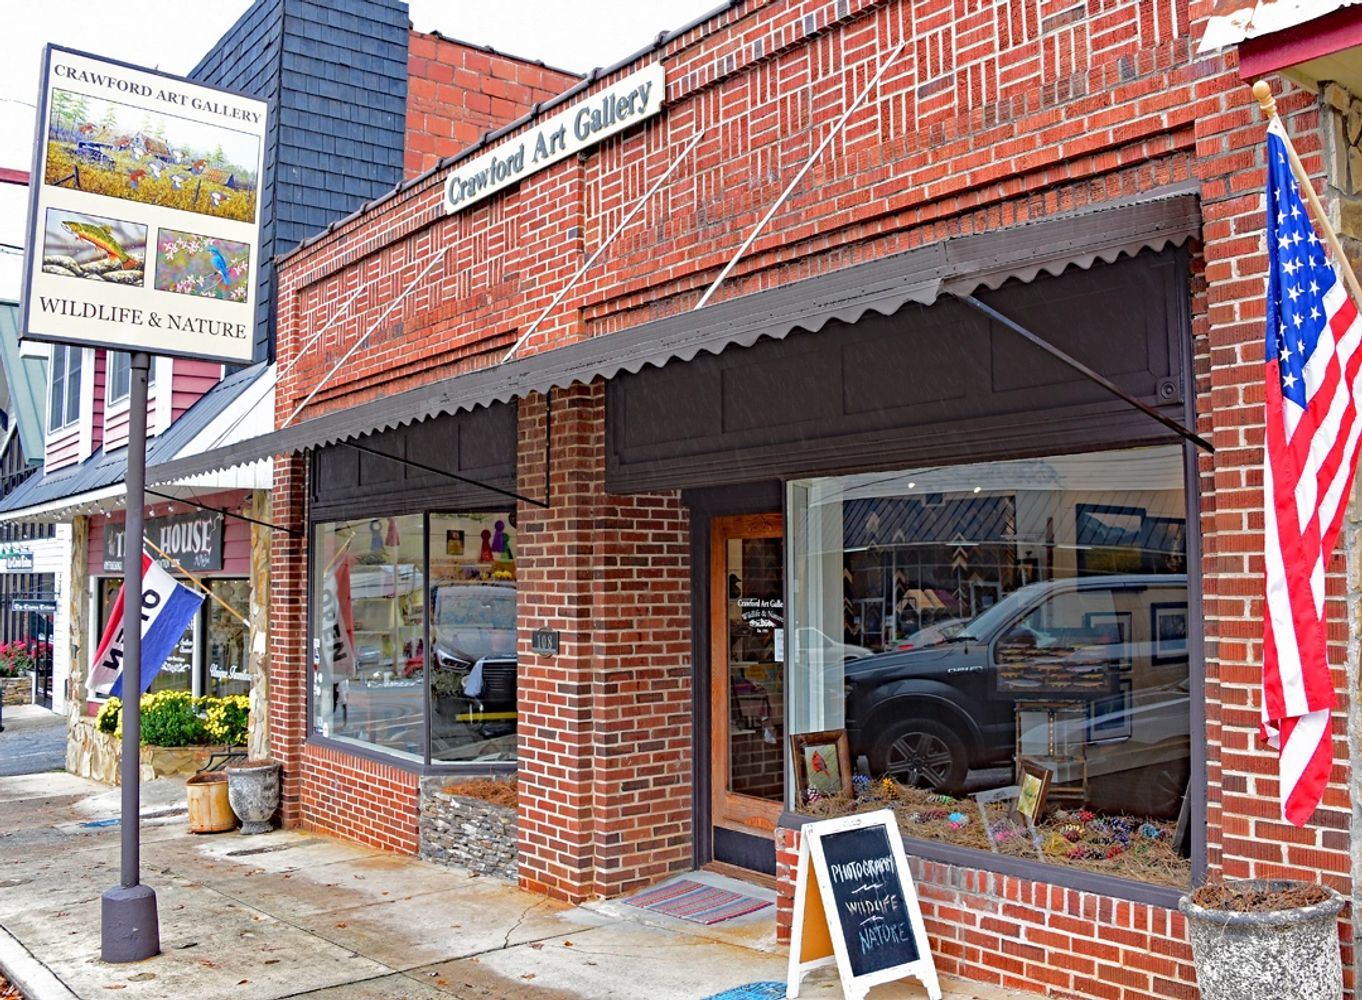 Image of the front of the brick and mortar store for Crawford Art Gallery, 108 N Main Street, Clayto